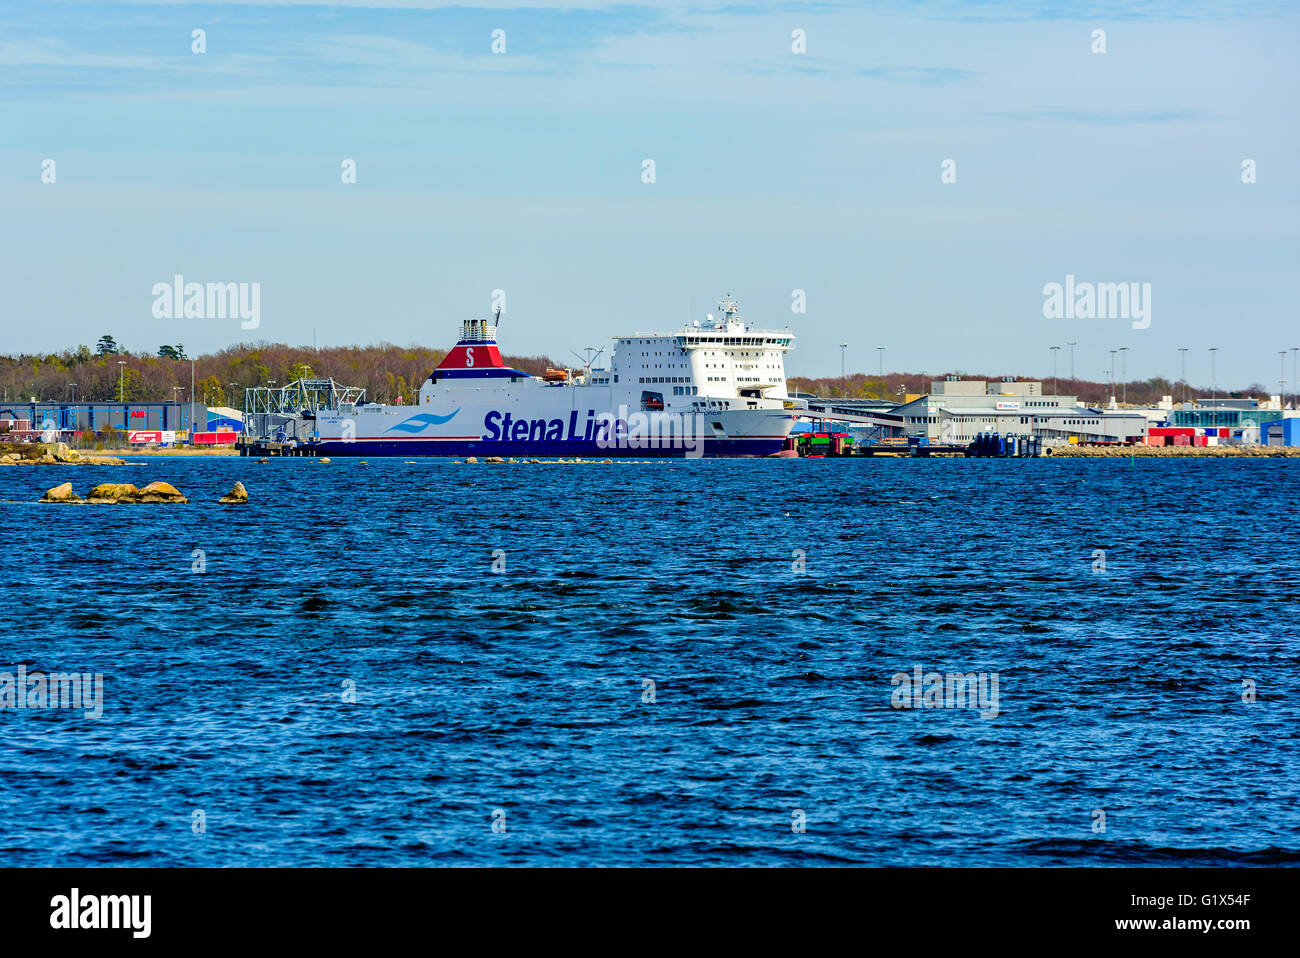 Karlskrona, Sweden - May 3, 2016: The freight ferry Stena Baltica dockside in Verko harbor. Stena Baltica operates the line Karl Stock Photo